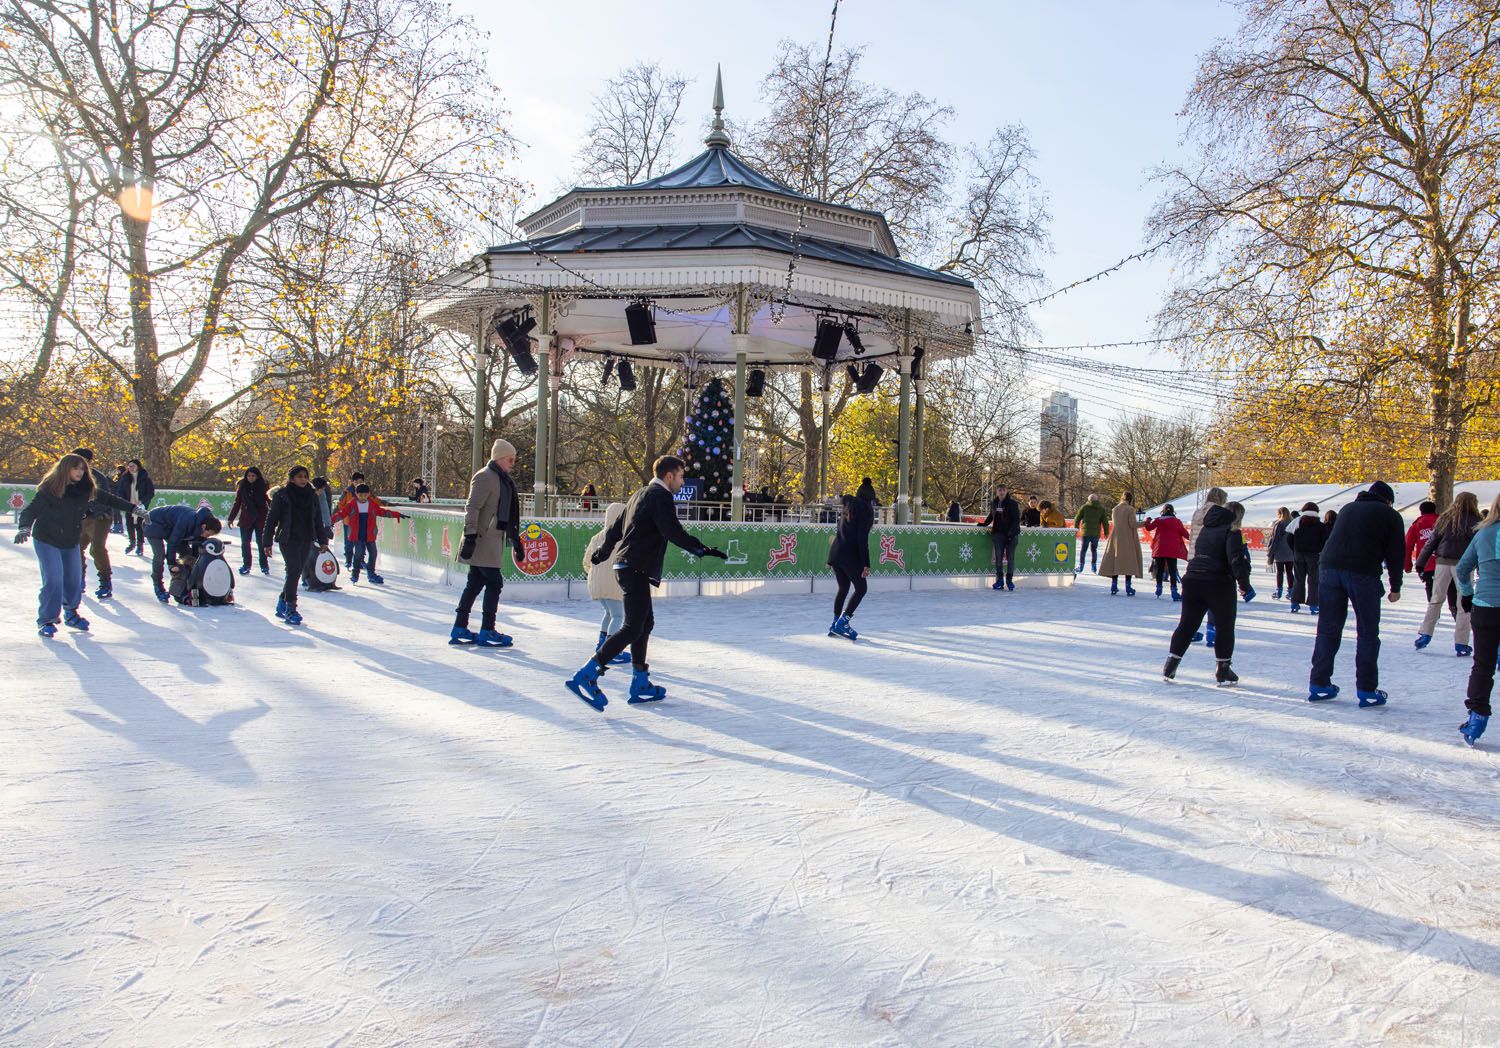 London Ice Rink | Best Things to Do in London